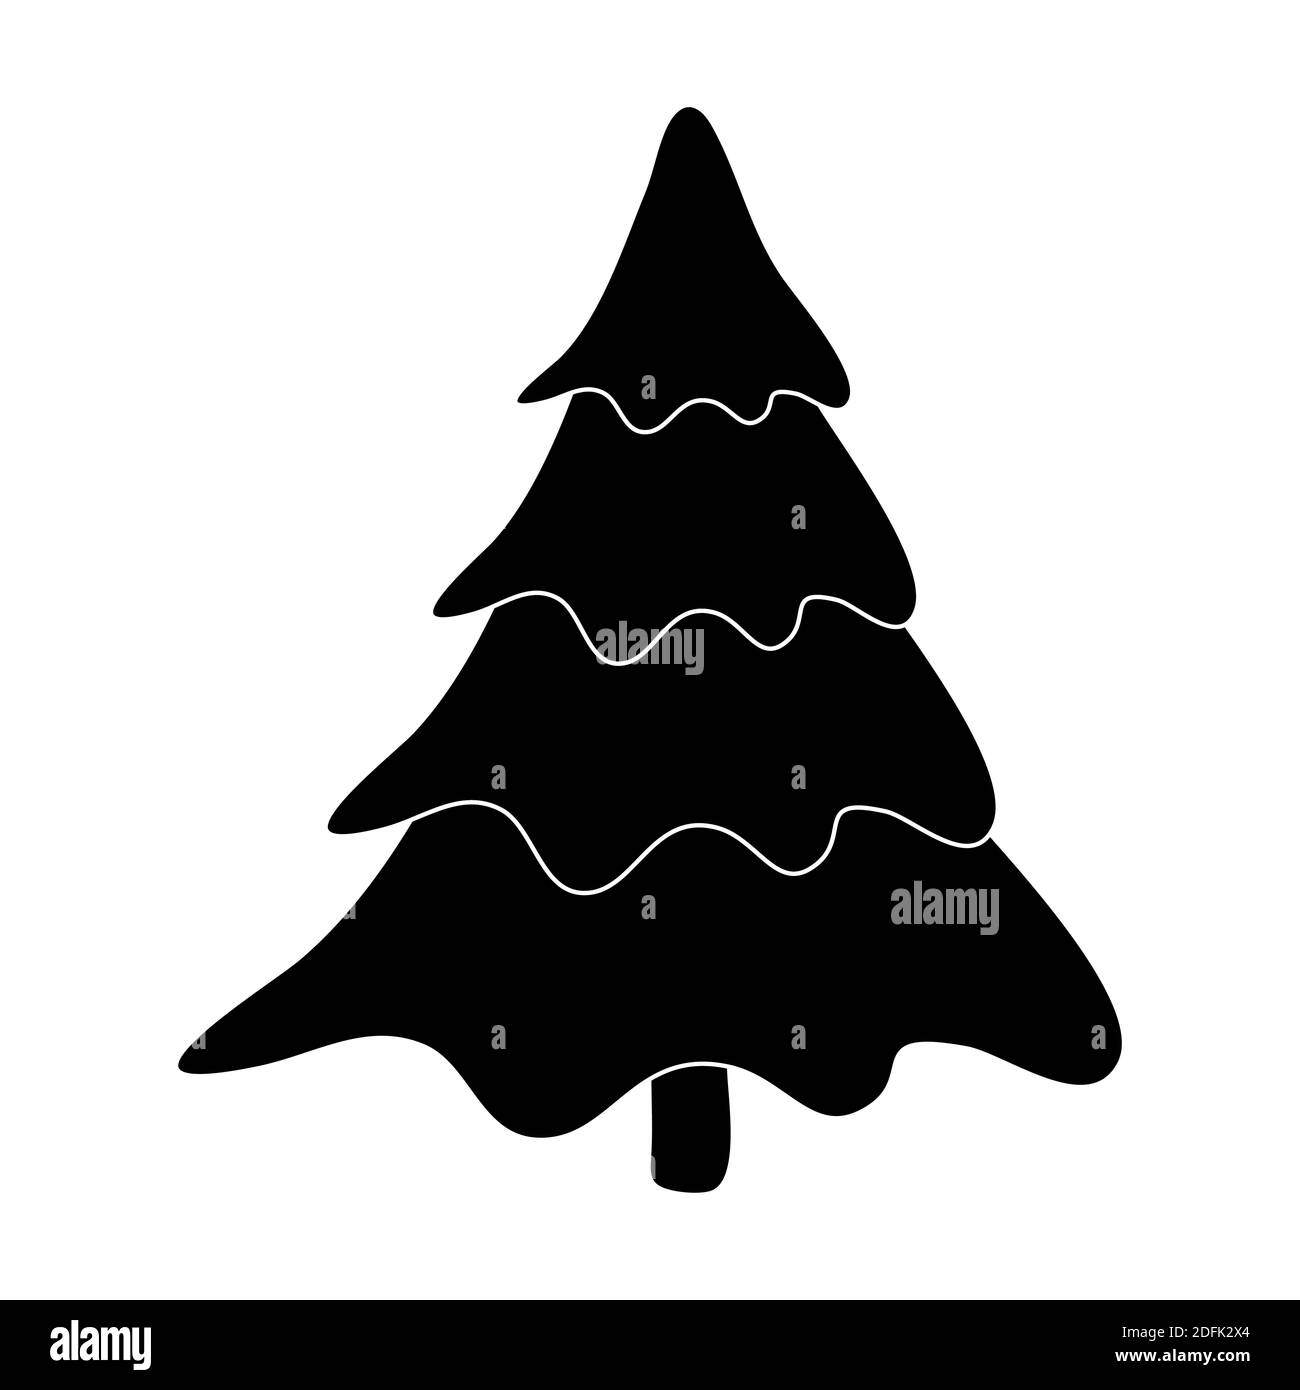 Christmas tree silhouette. Vector illustration isolated on white background. Black empty fir tree for your design. Blank simple pine drawing. December Stock Vector